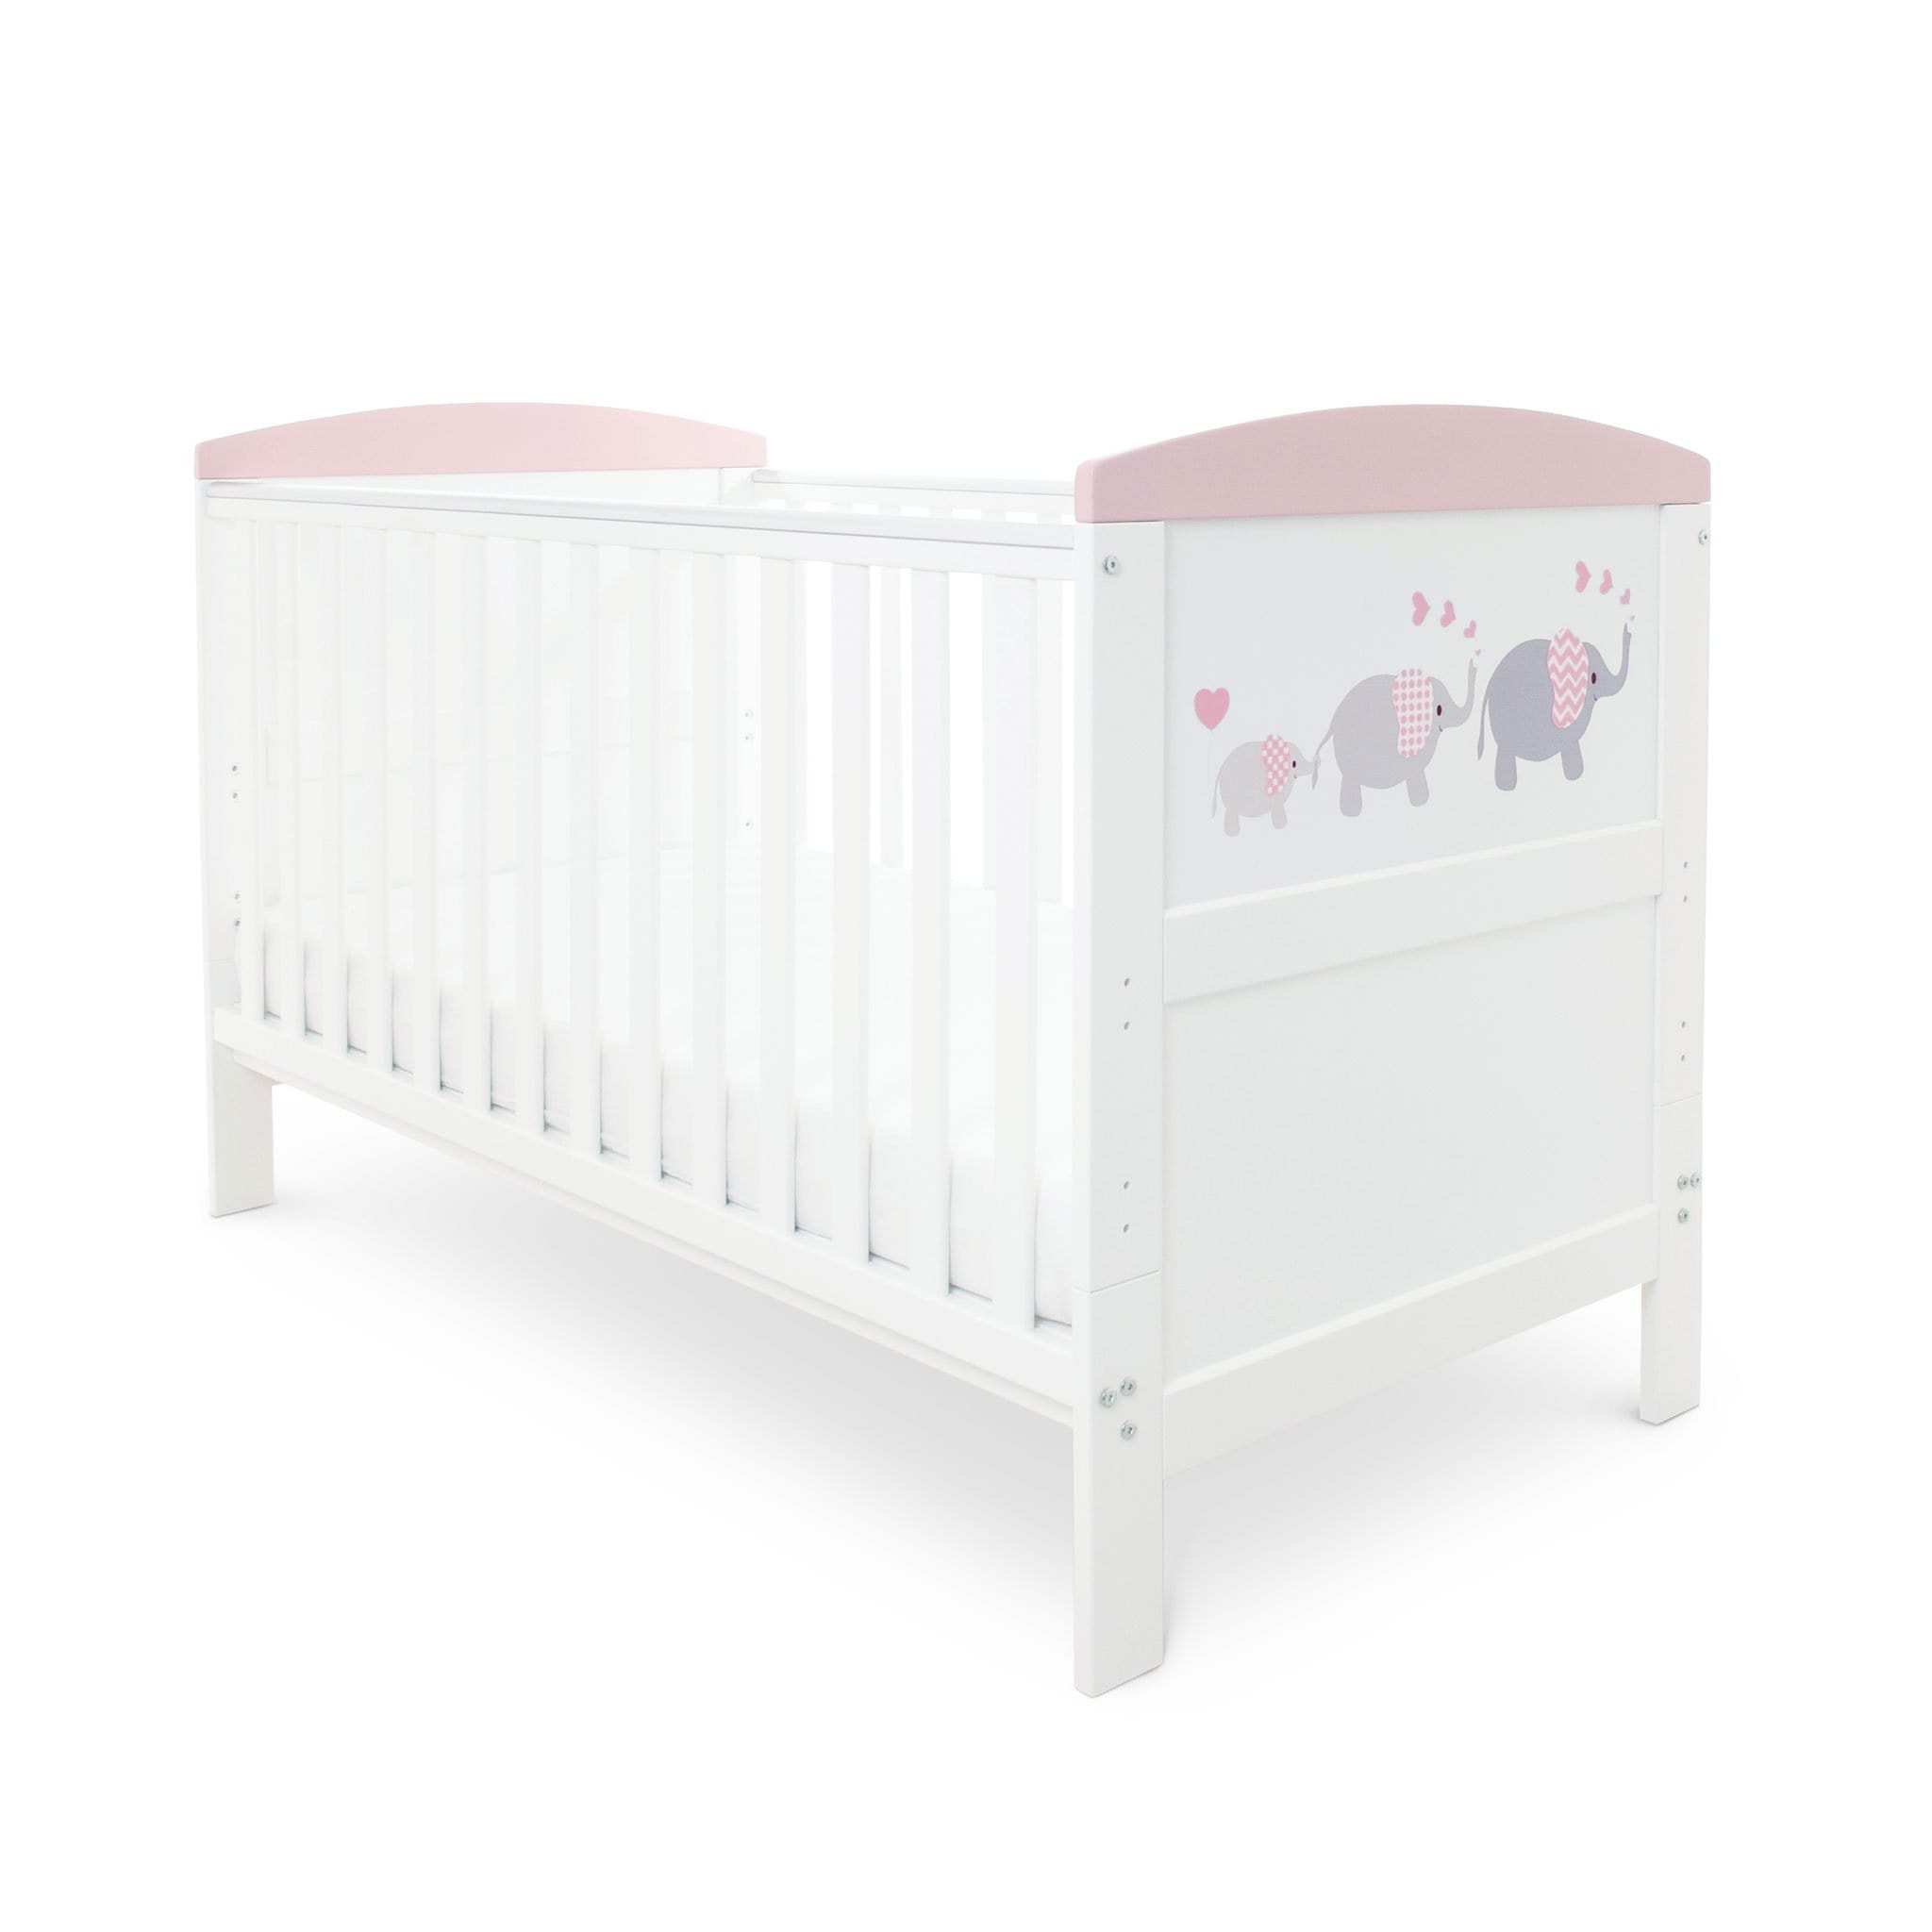 Ickle Bubba Cot Beds Ickle Bubba Coleby Style Cot Bed Elephant Love Pink 44-002-C2B-823